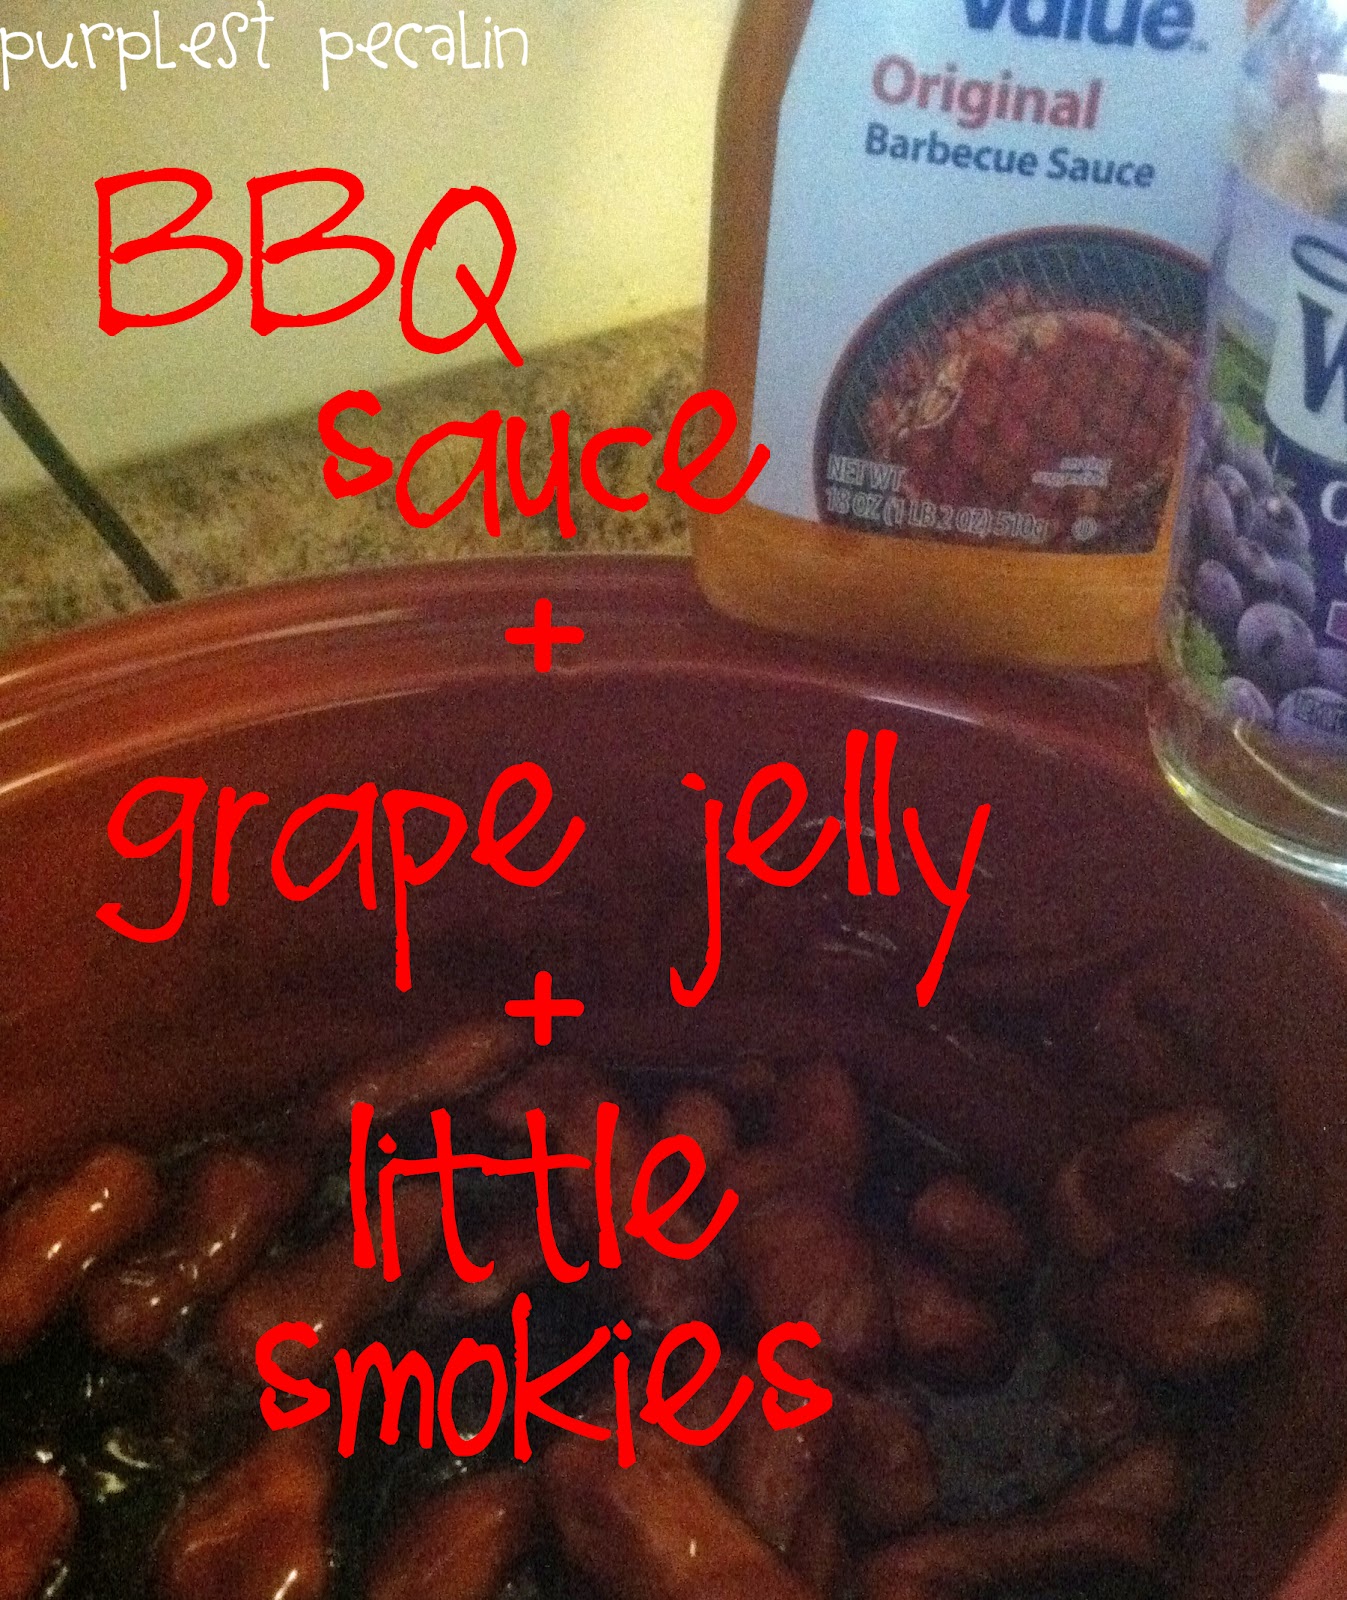 What are some tips for serving Little Smokies in barbecue sauce?